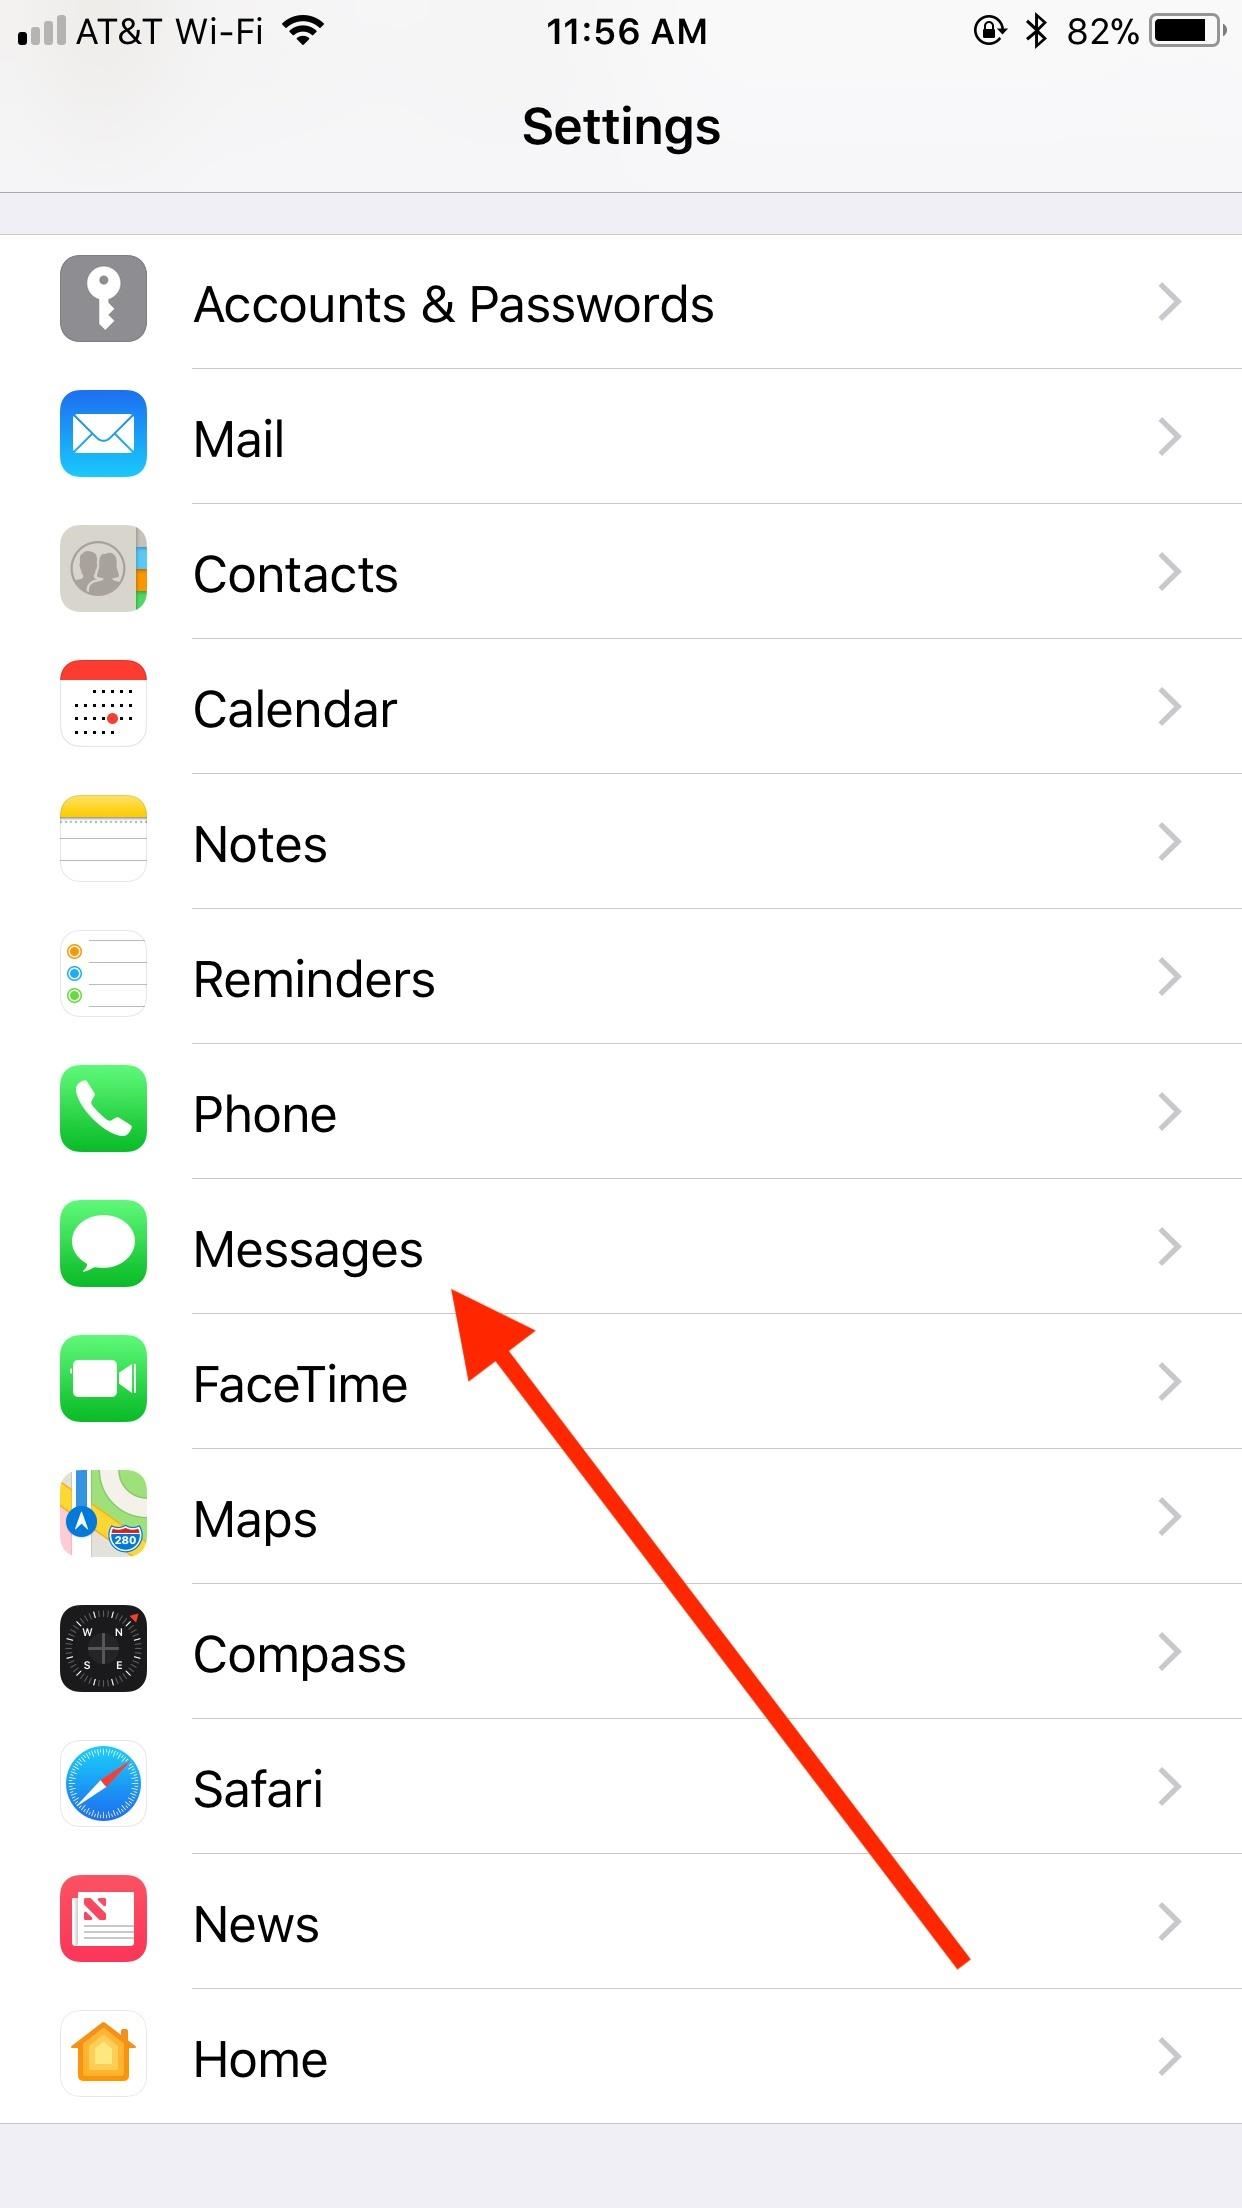 Messages Out of Order on Your iPhone? Use These Fixes to Display Conversations Correctly